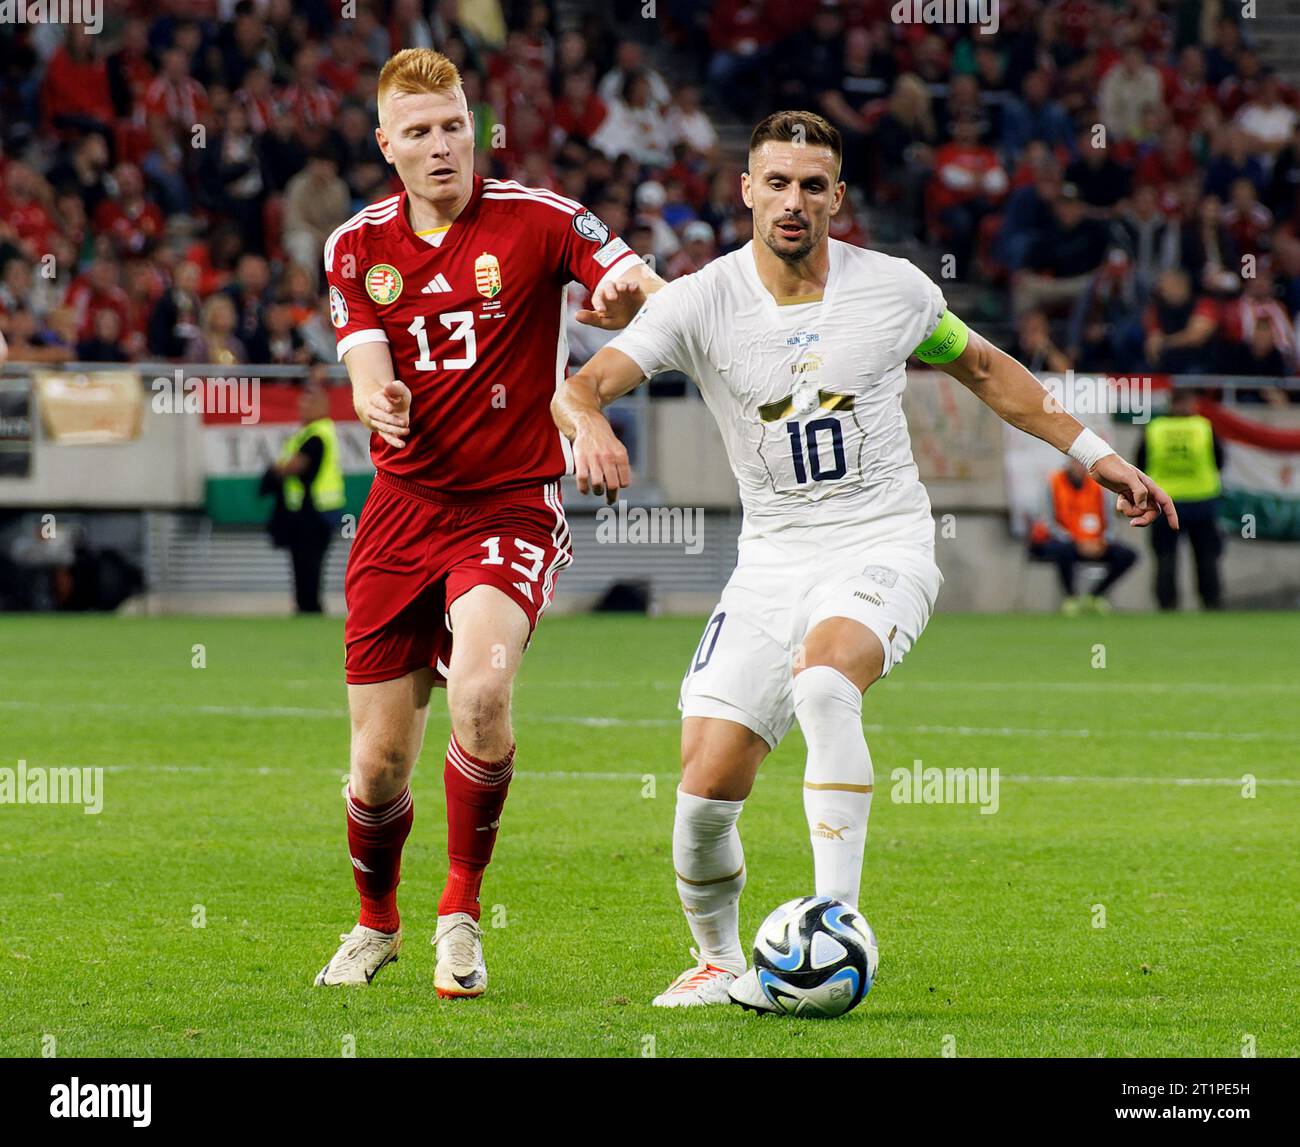 Budapest, Hungary. 14st October, 2023. Zsolt Kalmar of Hungary challenges Dusan Tadic of Serbia during the UEFA EURO 2024 European qualifier match between Hungary and Serbia at Puskas Arena on October 14, 2023 in Budapest, Hungary. Credit: Laszlo Szirtesi/Alamy Live News Stock Photo